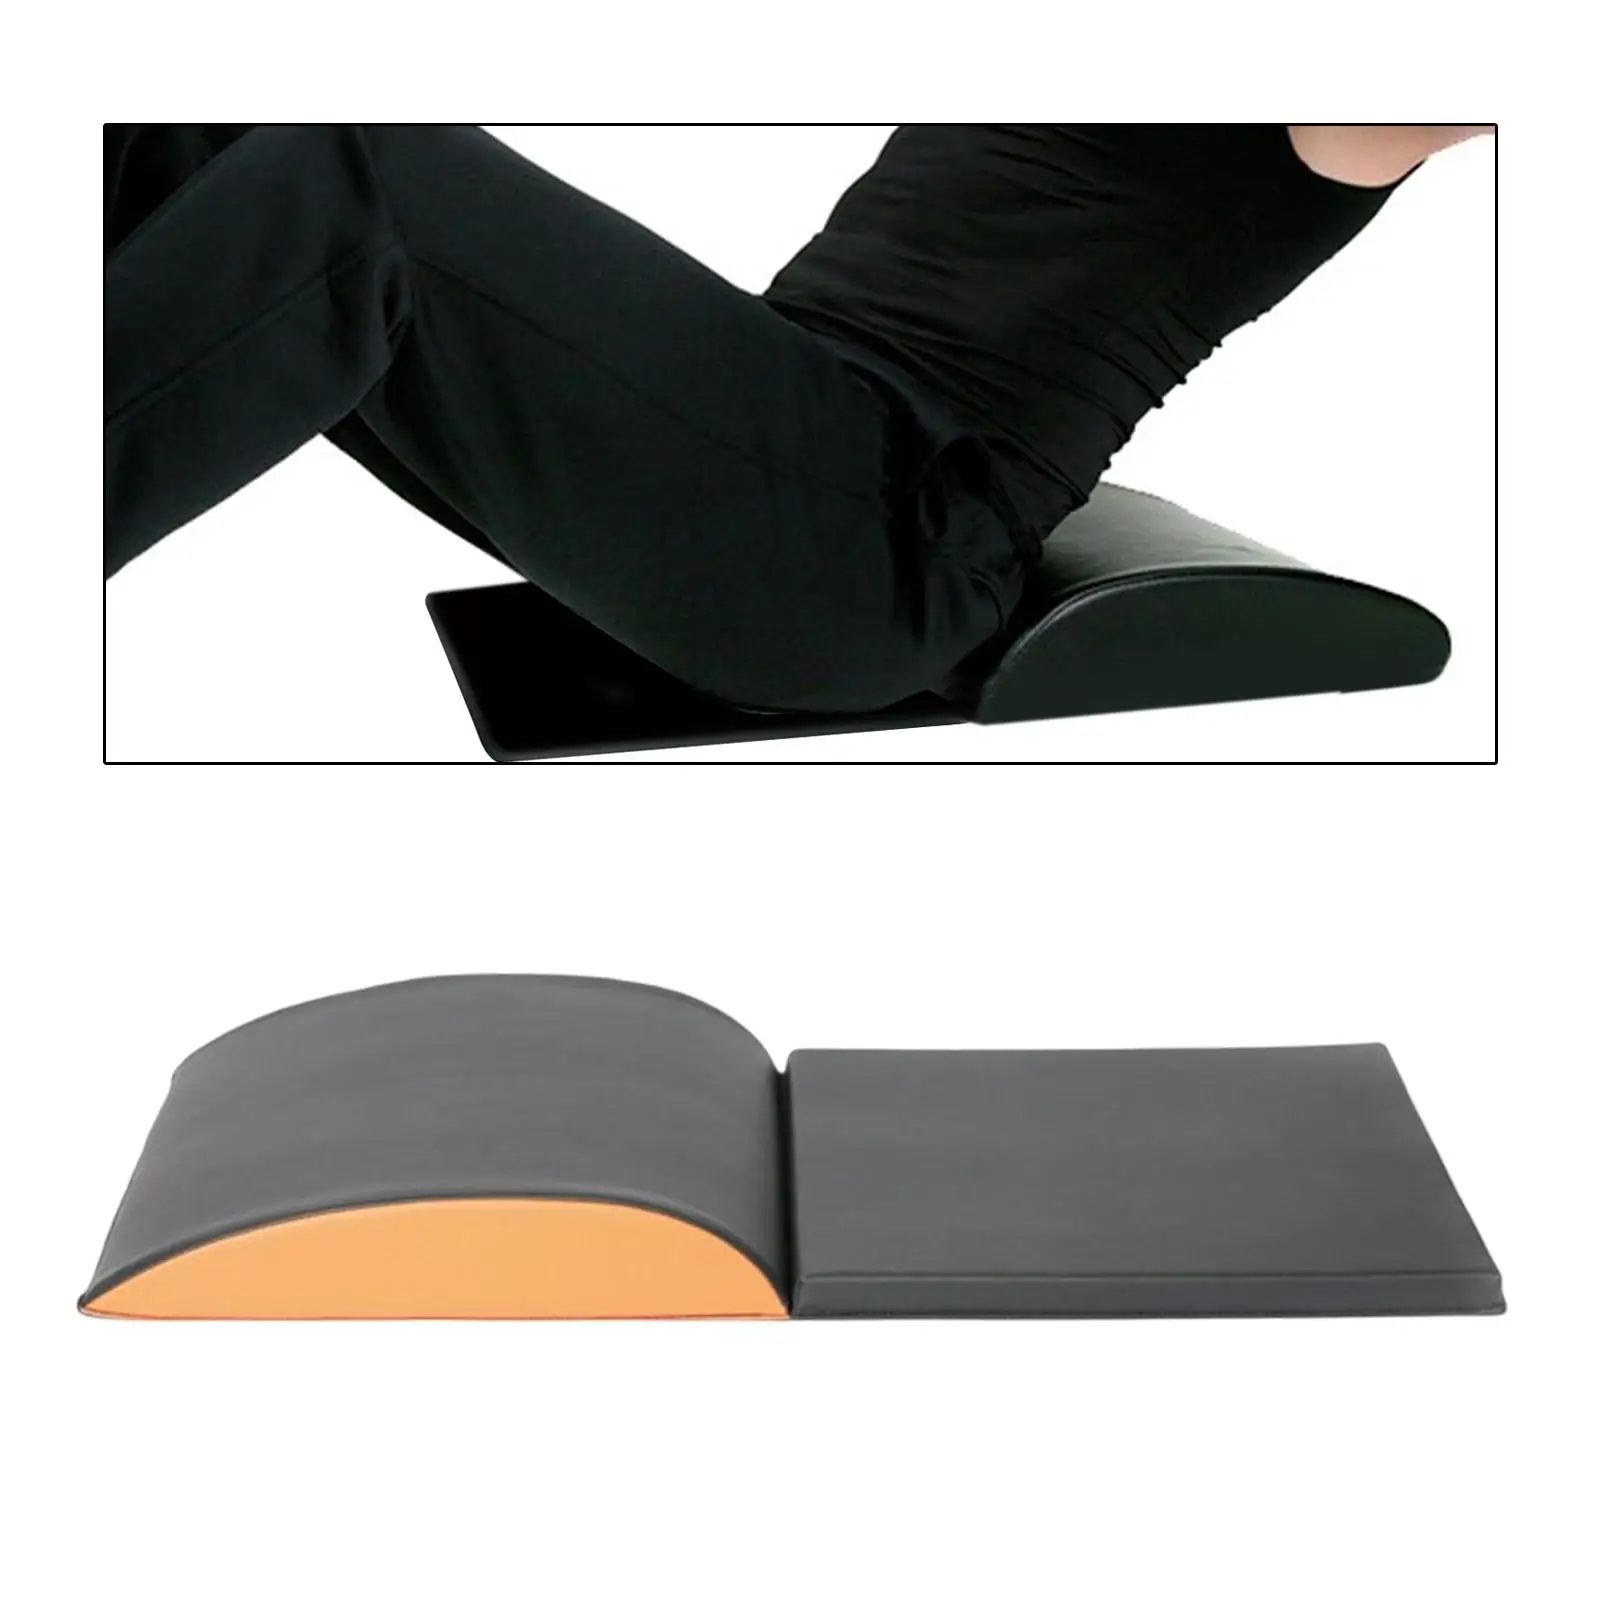 Foldable Ab Exercise Mat Abdominal Core Trainer Pad Lower Upper Back Back Support Adults Sit up for Workout Home Exercise